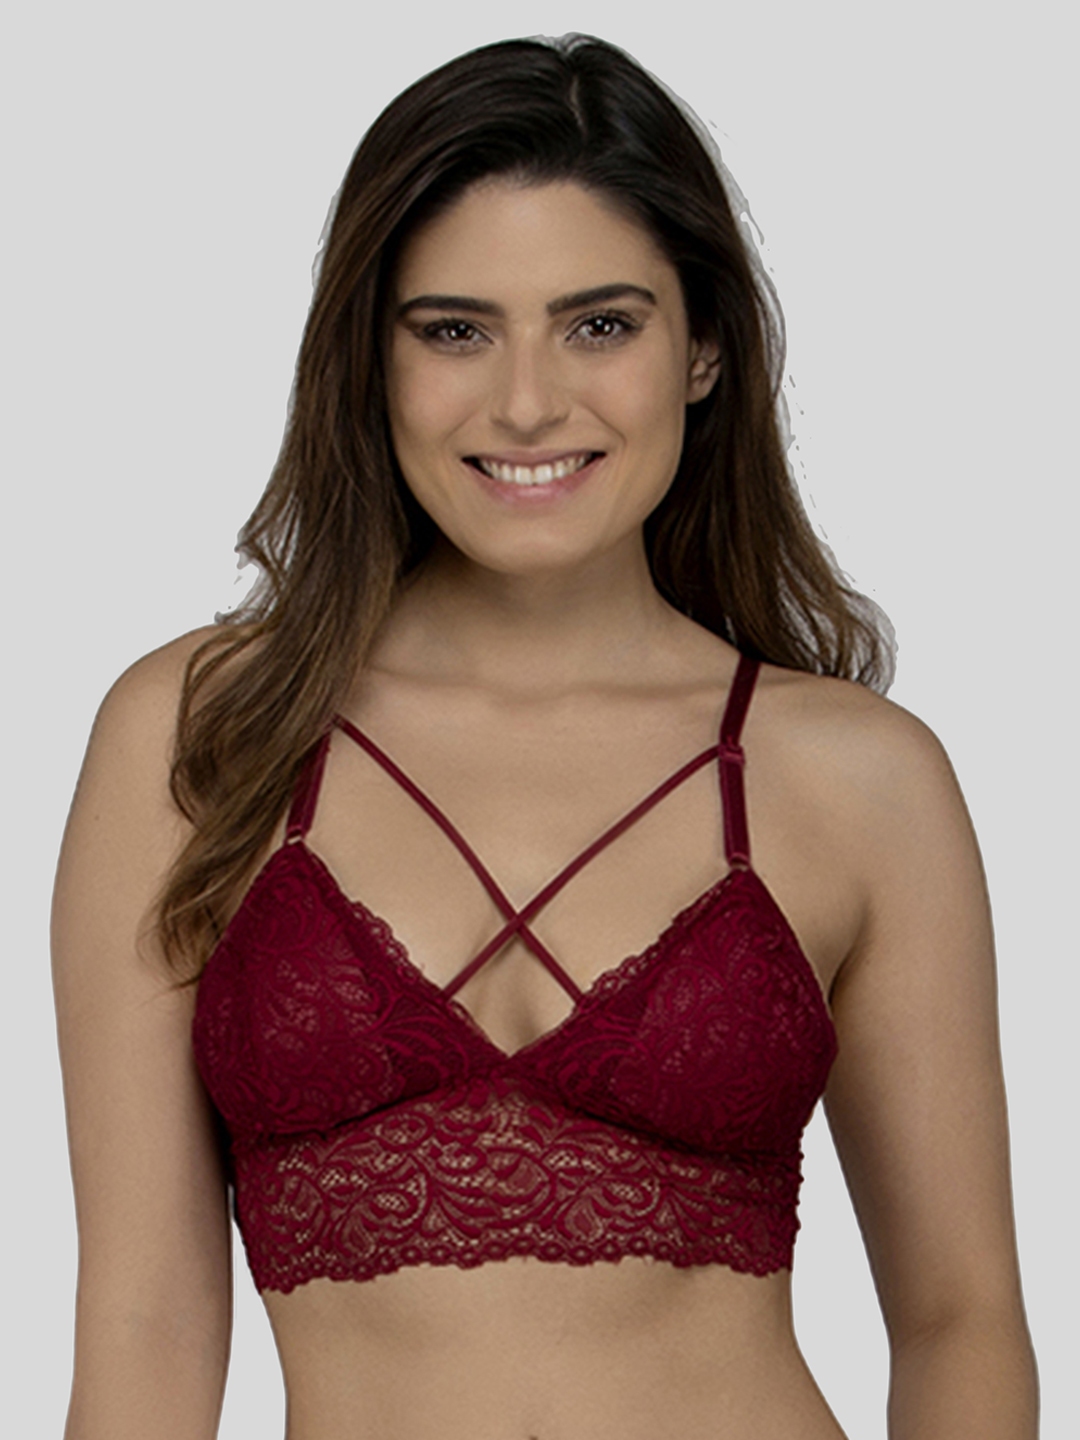 Laceandme Maroon Lace Non-Wired Lightly Padded Bralette Bra 4304